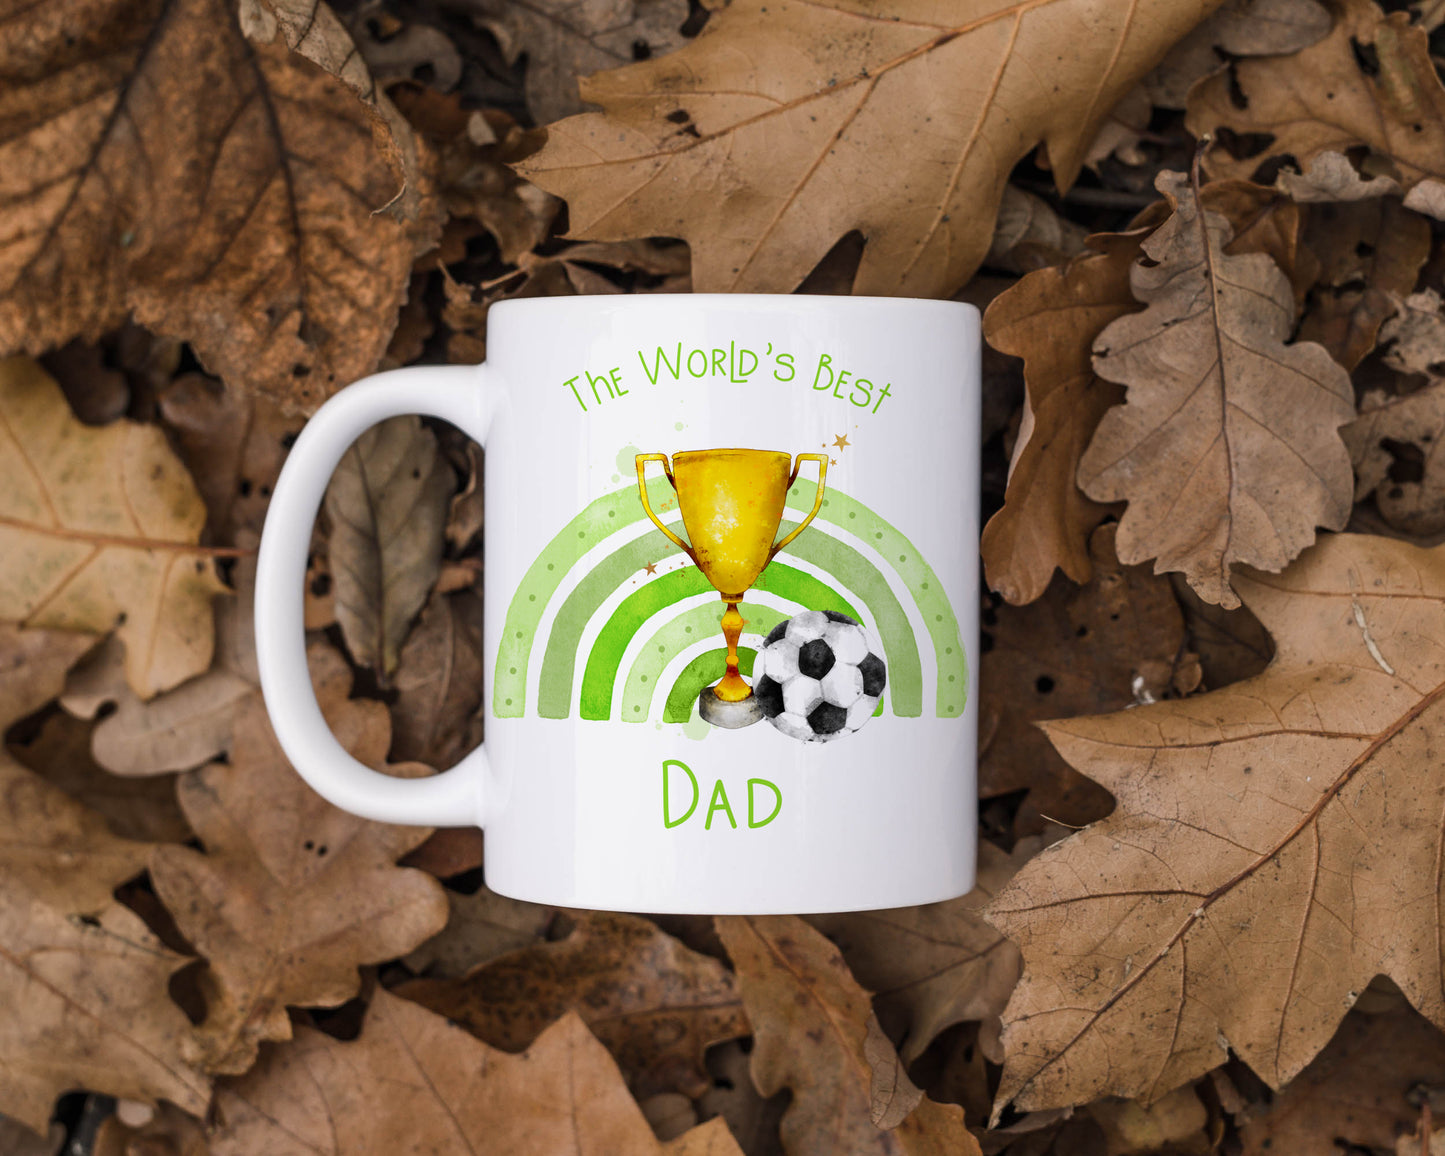 Ceramic mug featuring a trophy, football and green rainbow. The text reads 'The World's best' and can be personalised